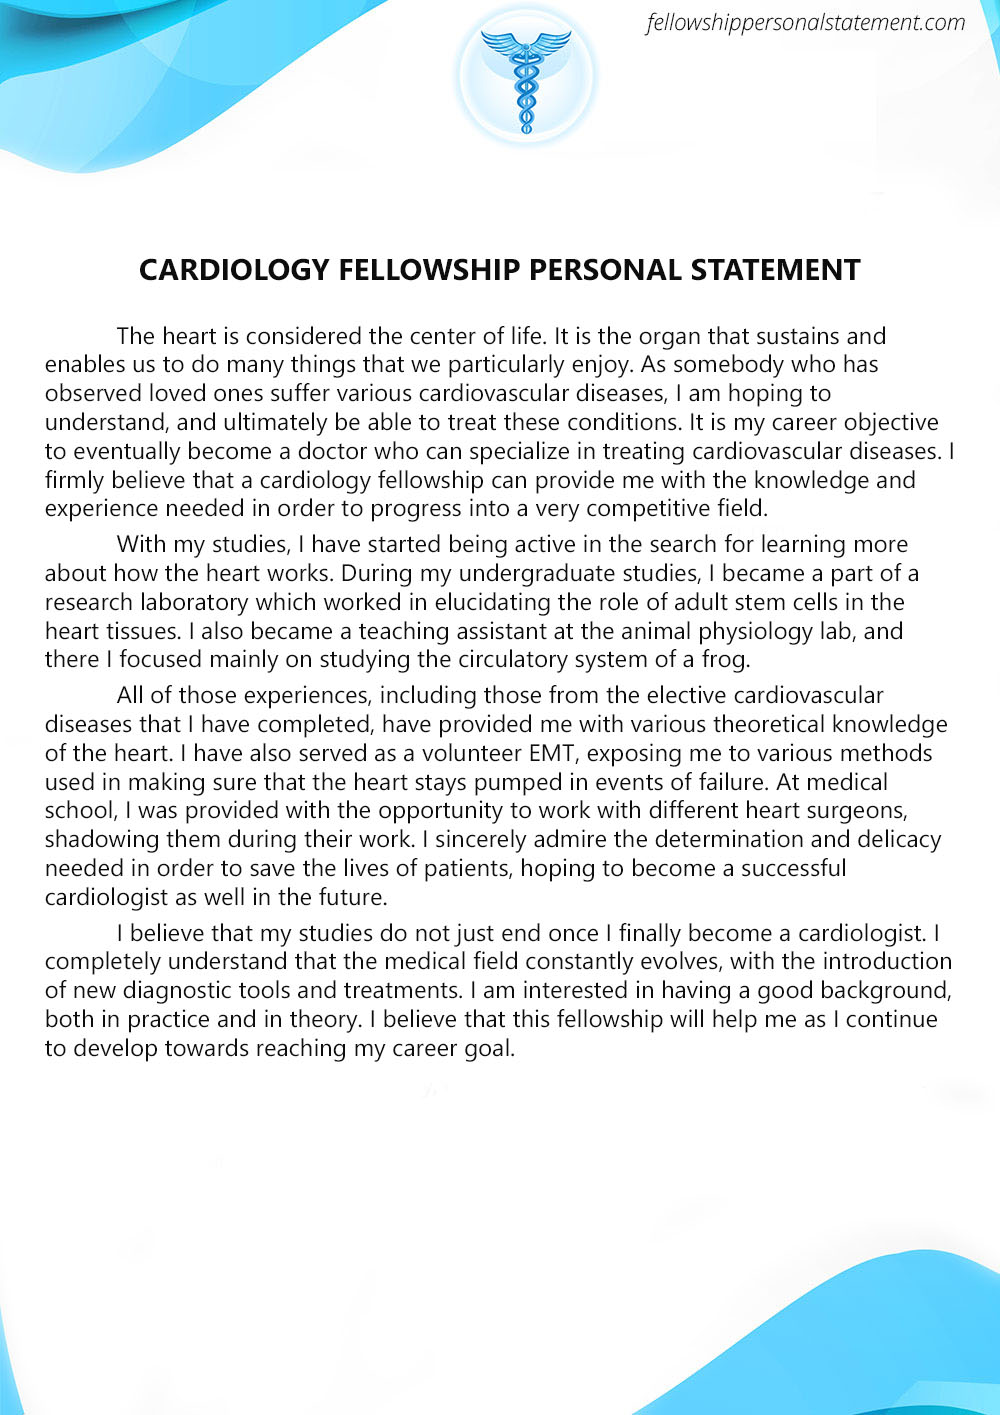 Cardiology fellowship personal statement